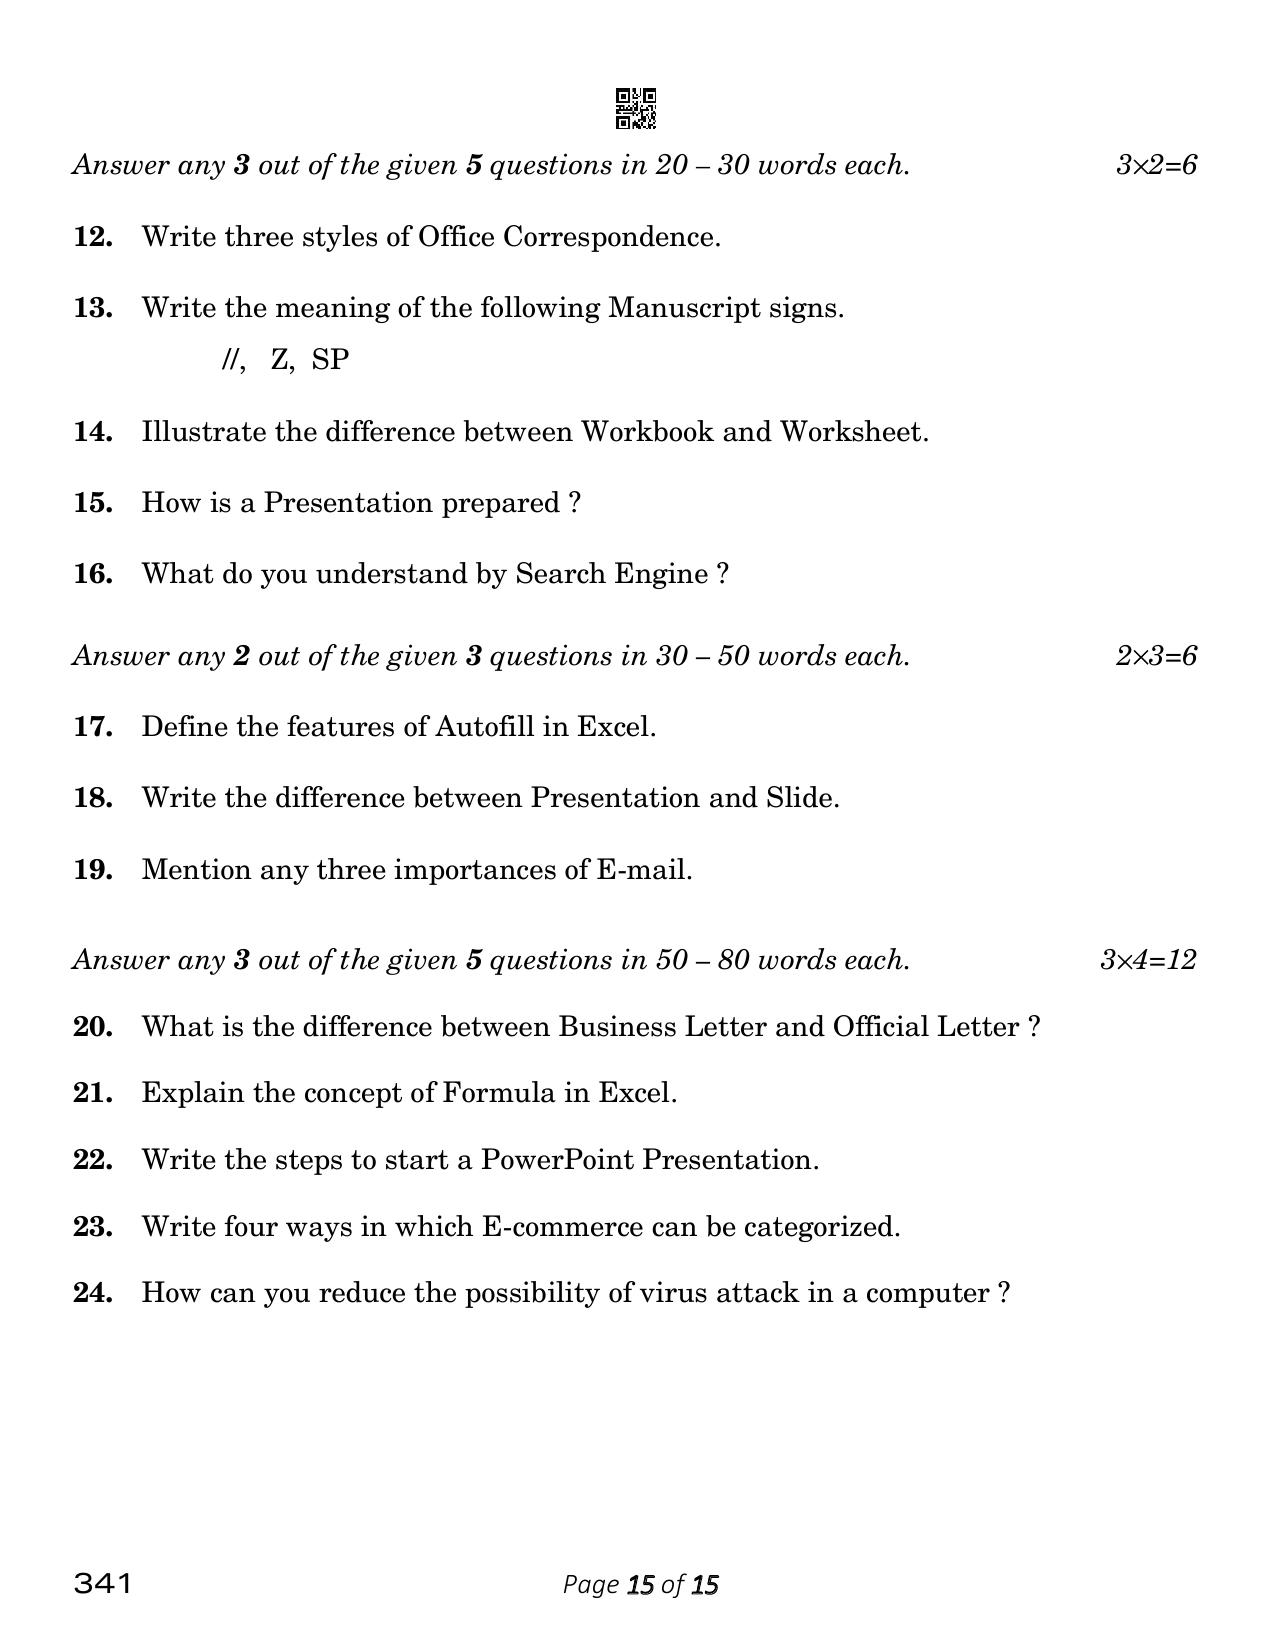 CBSE Class 12 Typography & Computer Applications (Compartment) 2023 Question Paper - Page 15